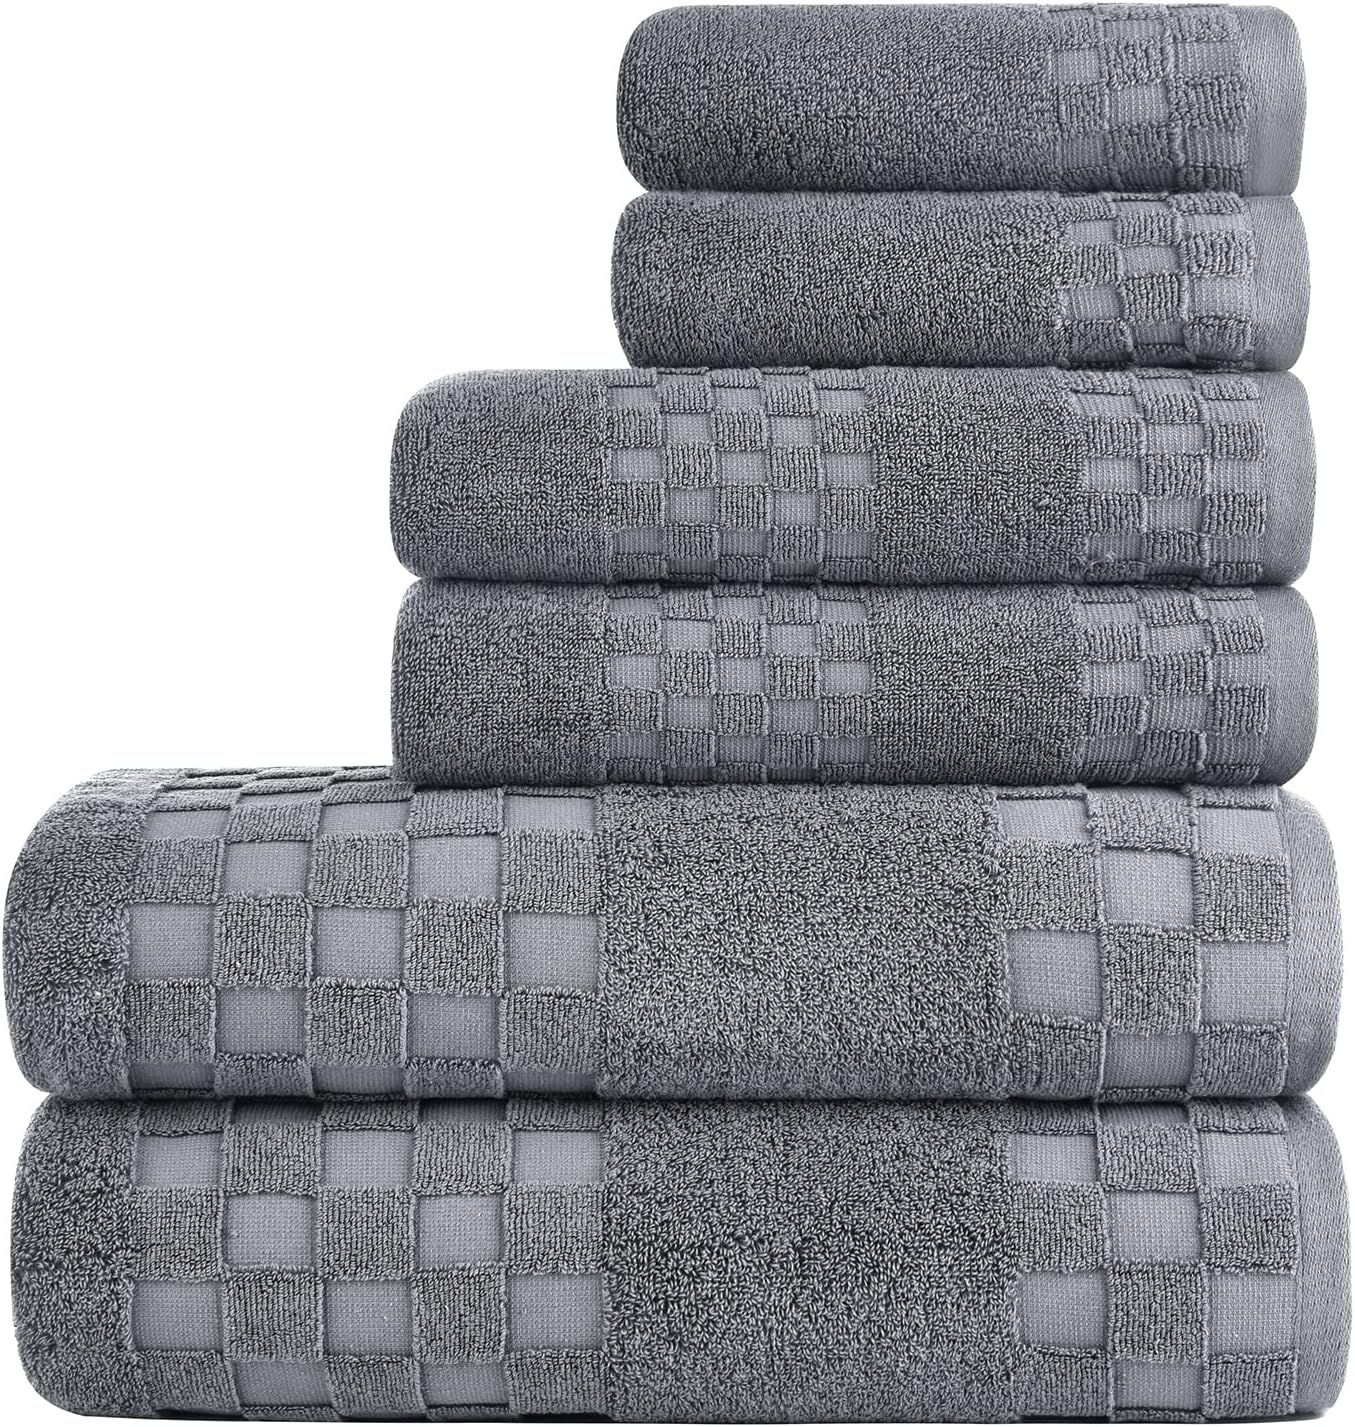 DIAOJIA Bath Towels Soft Cotton 6 Piece,100% Cotton Anti Odor Family Towels, Highly Absorbent Quick-Drying Lightweight Spa Towel for Bathroom 2 Bath Towel 2 Washcloth 2 Hand Towel (Cool Grey)